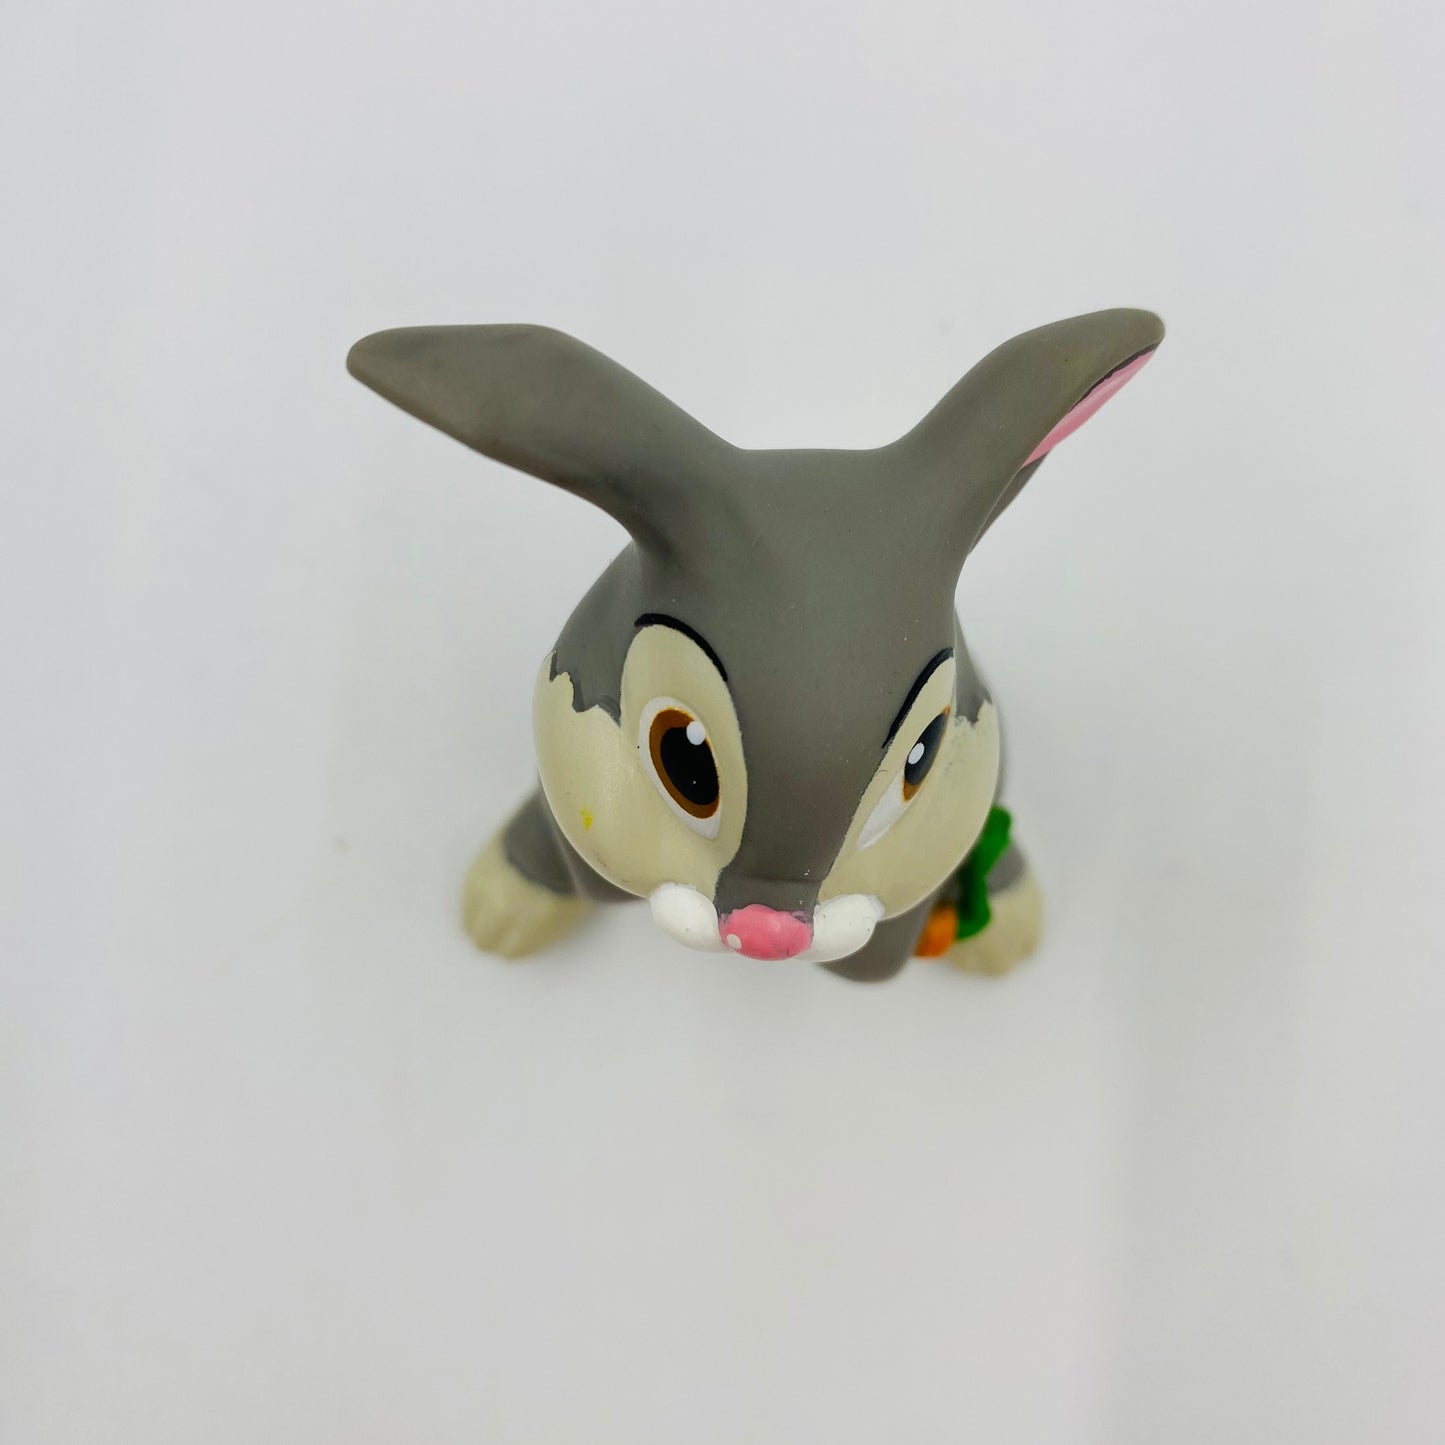 Bambi Thumper McDonald's Happy Meal toy figure (1988) loose